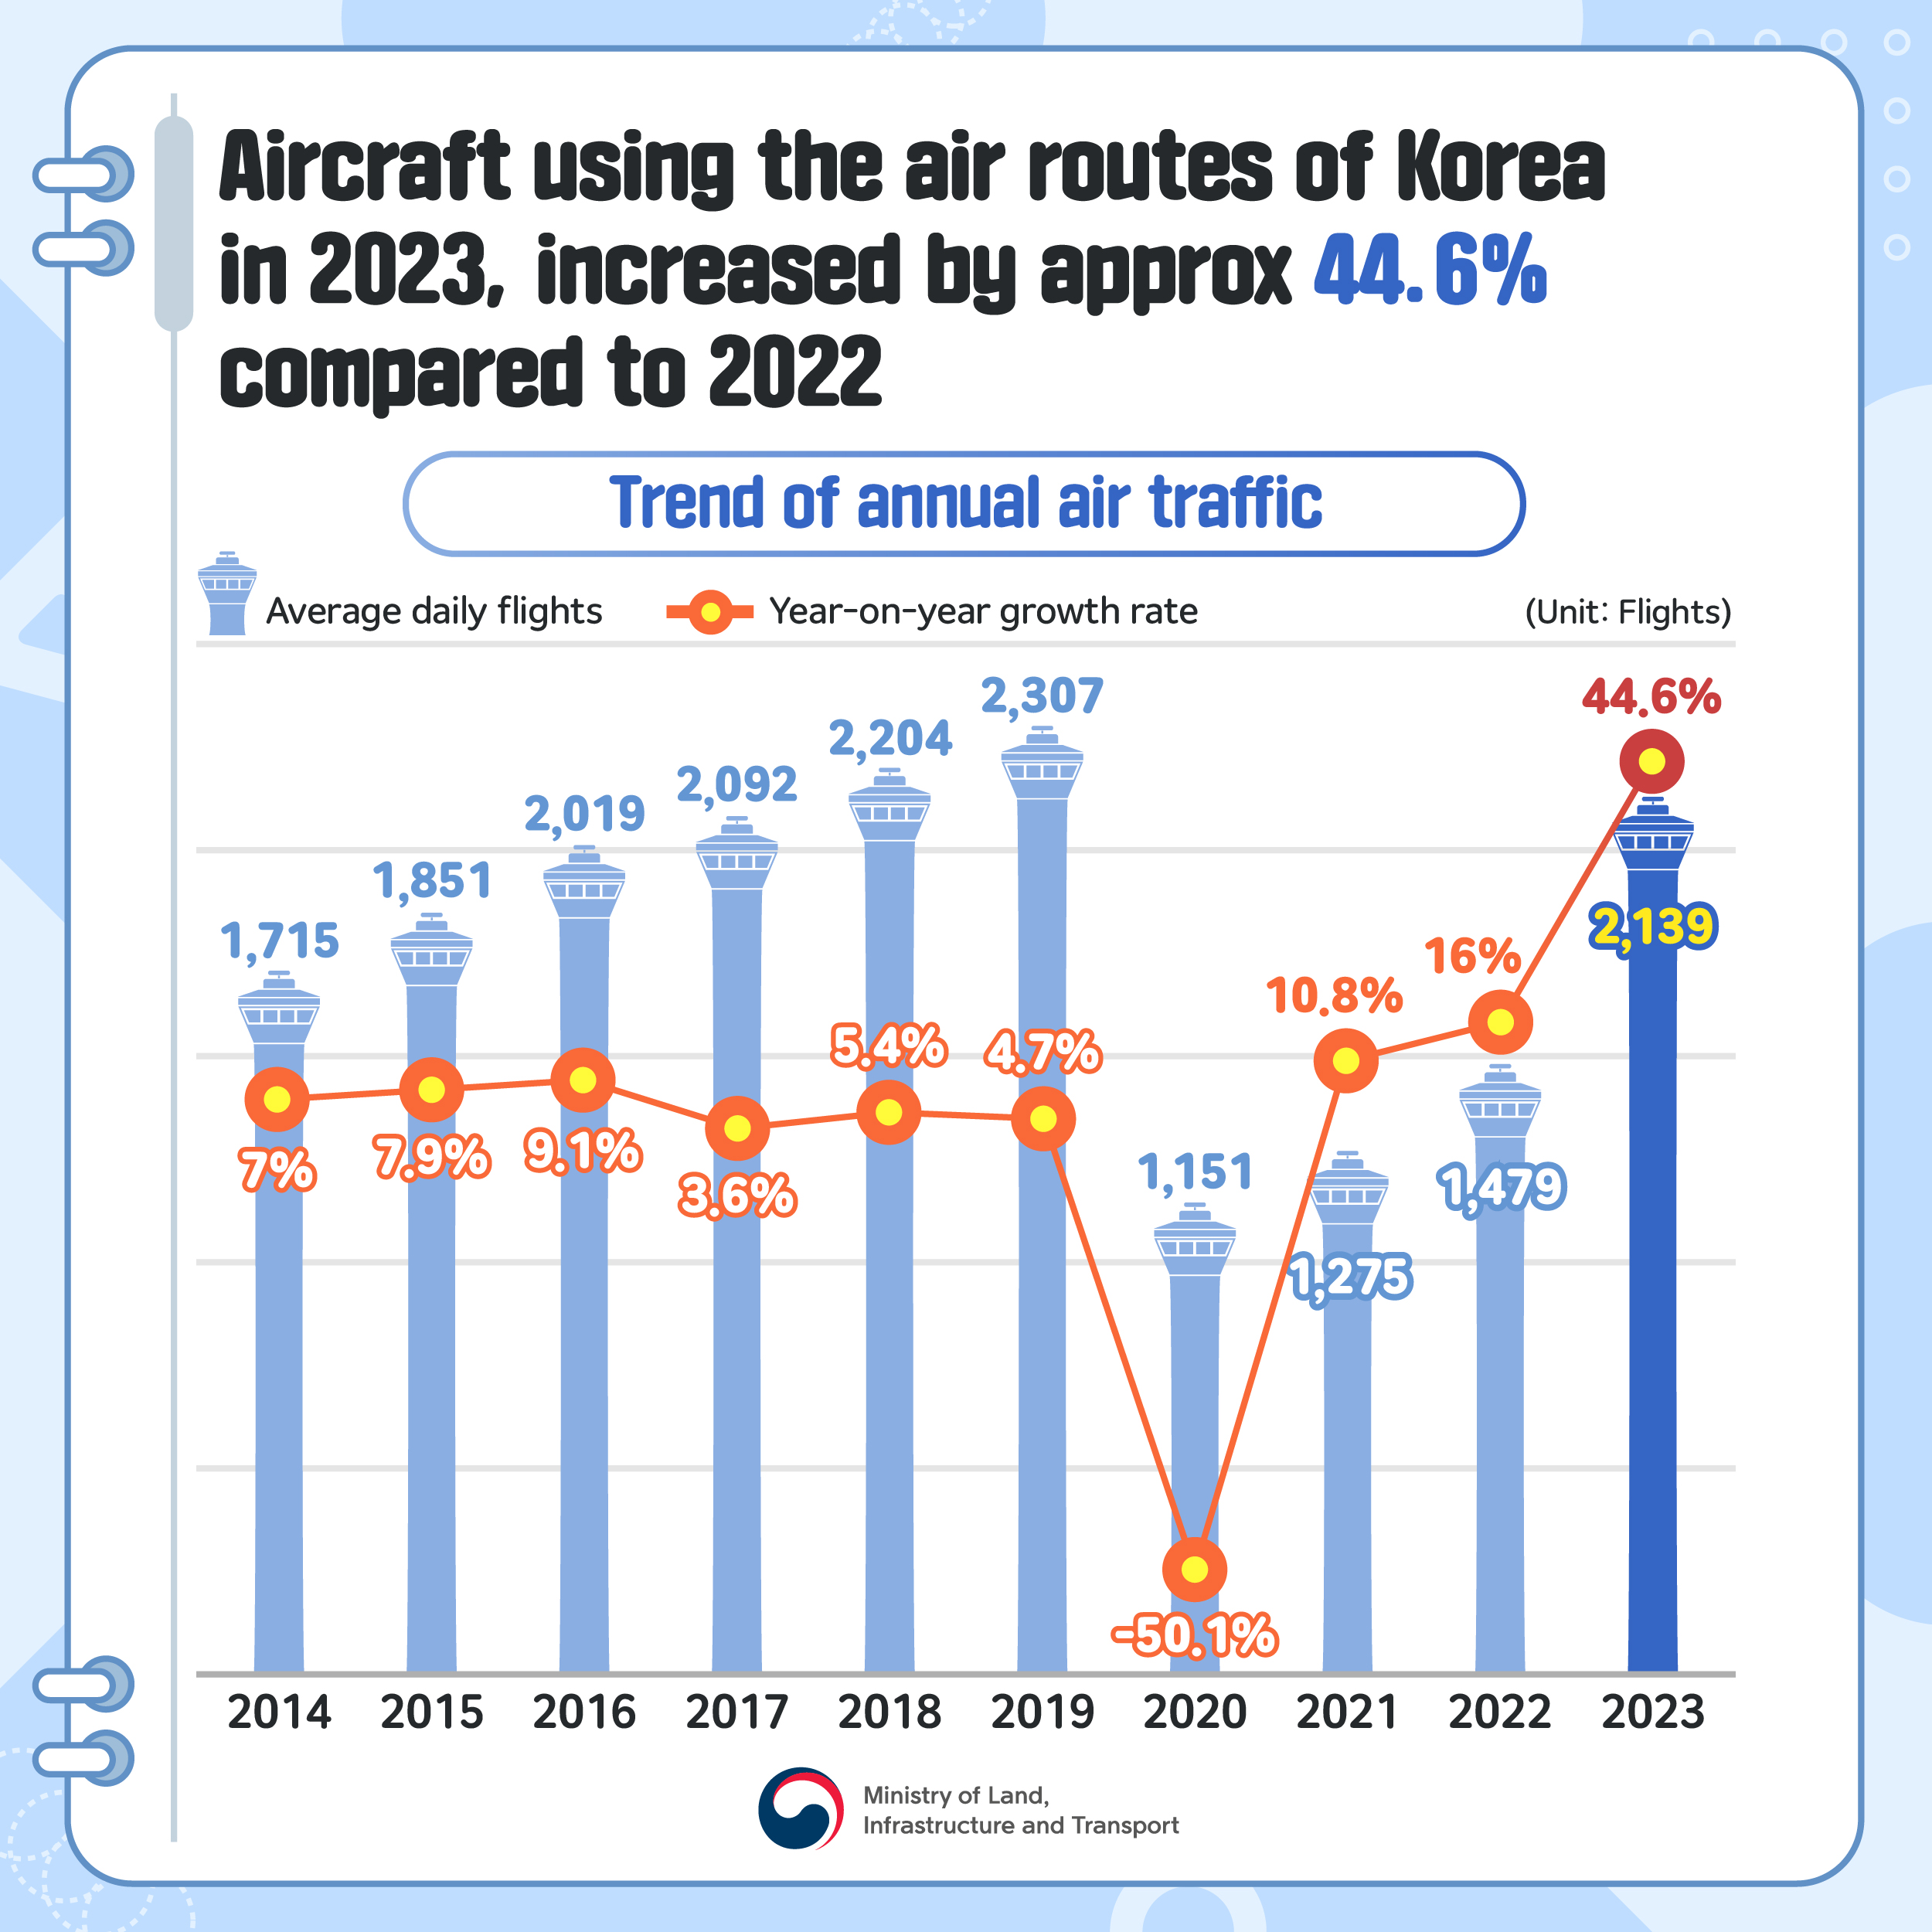 pic 2. Aircraft using the air routes of Korea in 2023, increased by approx 44.6% compared to 2022
